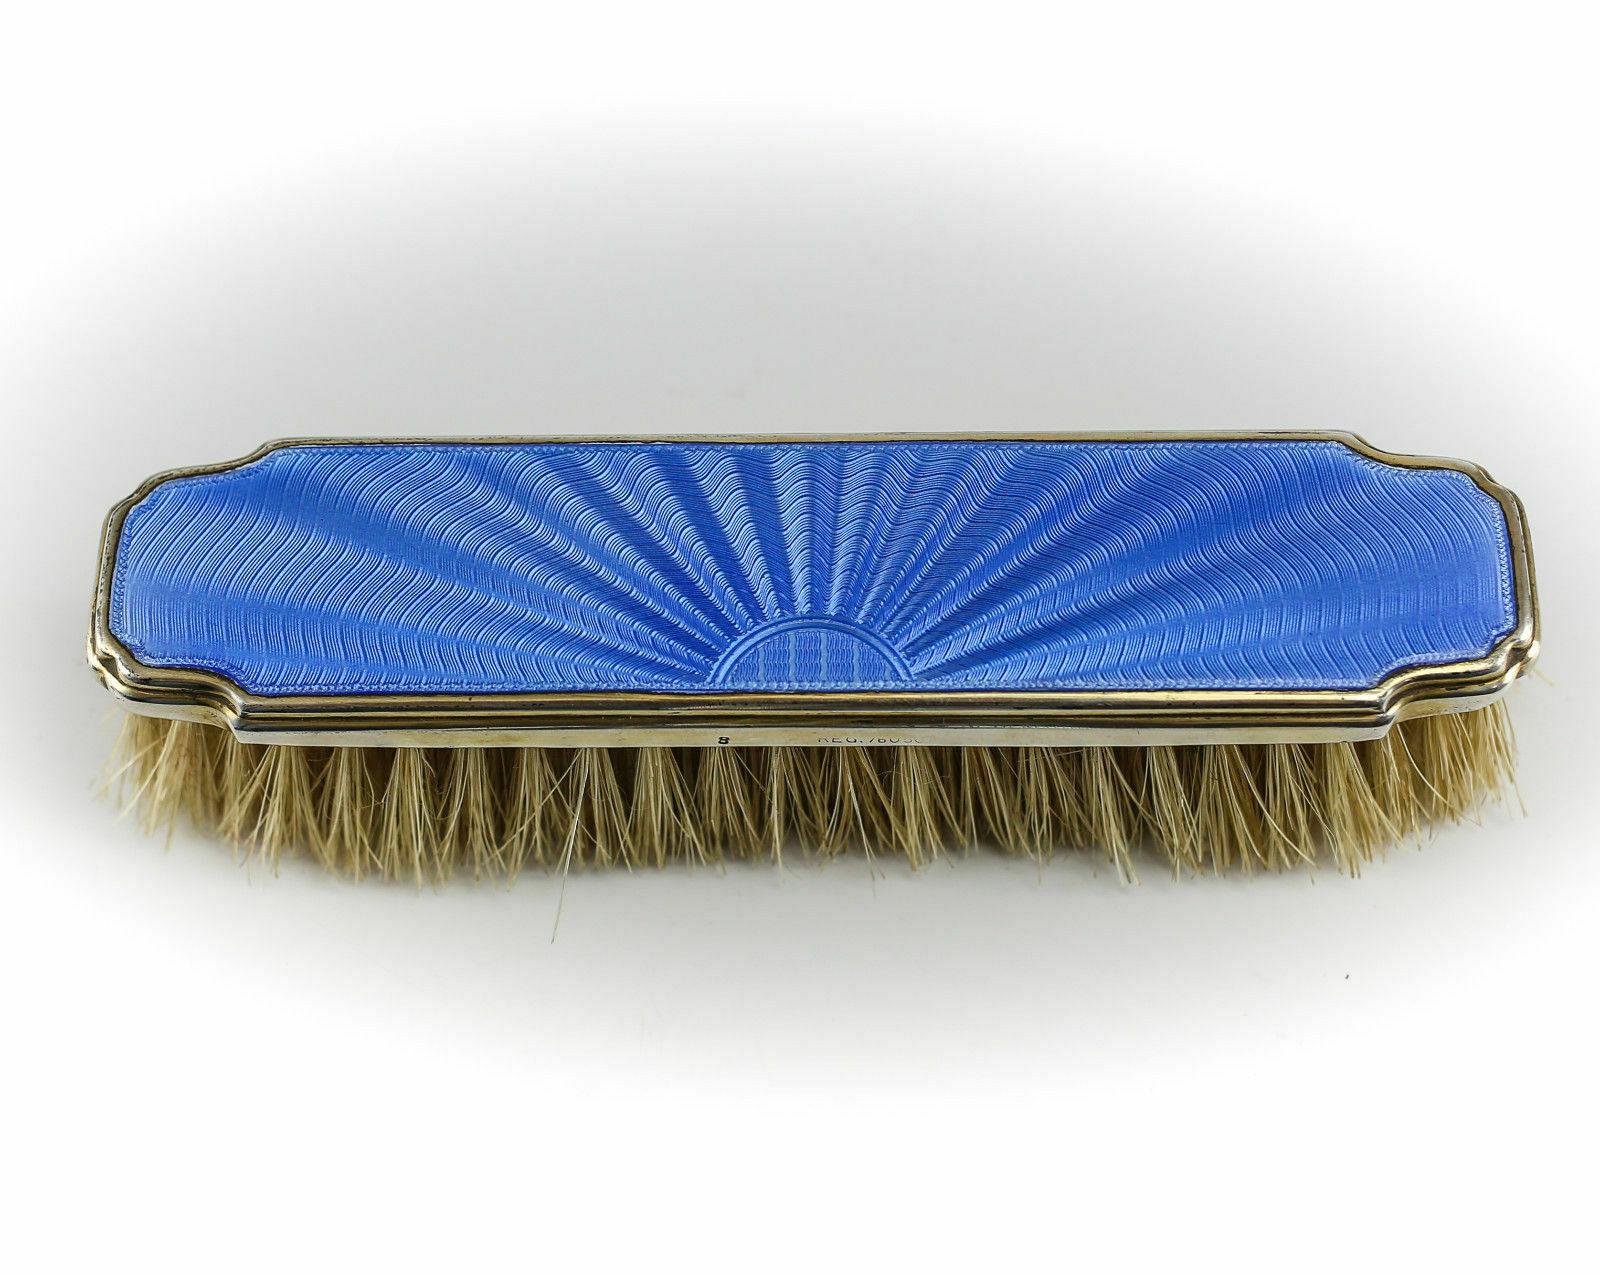 Set includes hand mirror, hair brush, & clothes brush. Beautiful hand painted aqua blue Enamel. Hallmarked for Elkington & Co.

Additional information:
Brand: Birmingham 
Composition: Sterling silver
Dimension: Mirror 10.5 inches Length; Hair